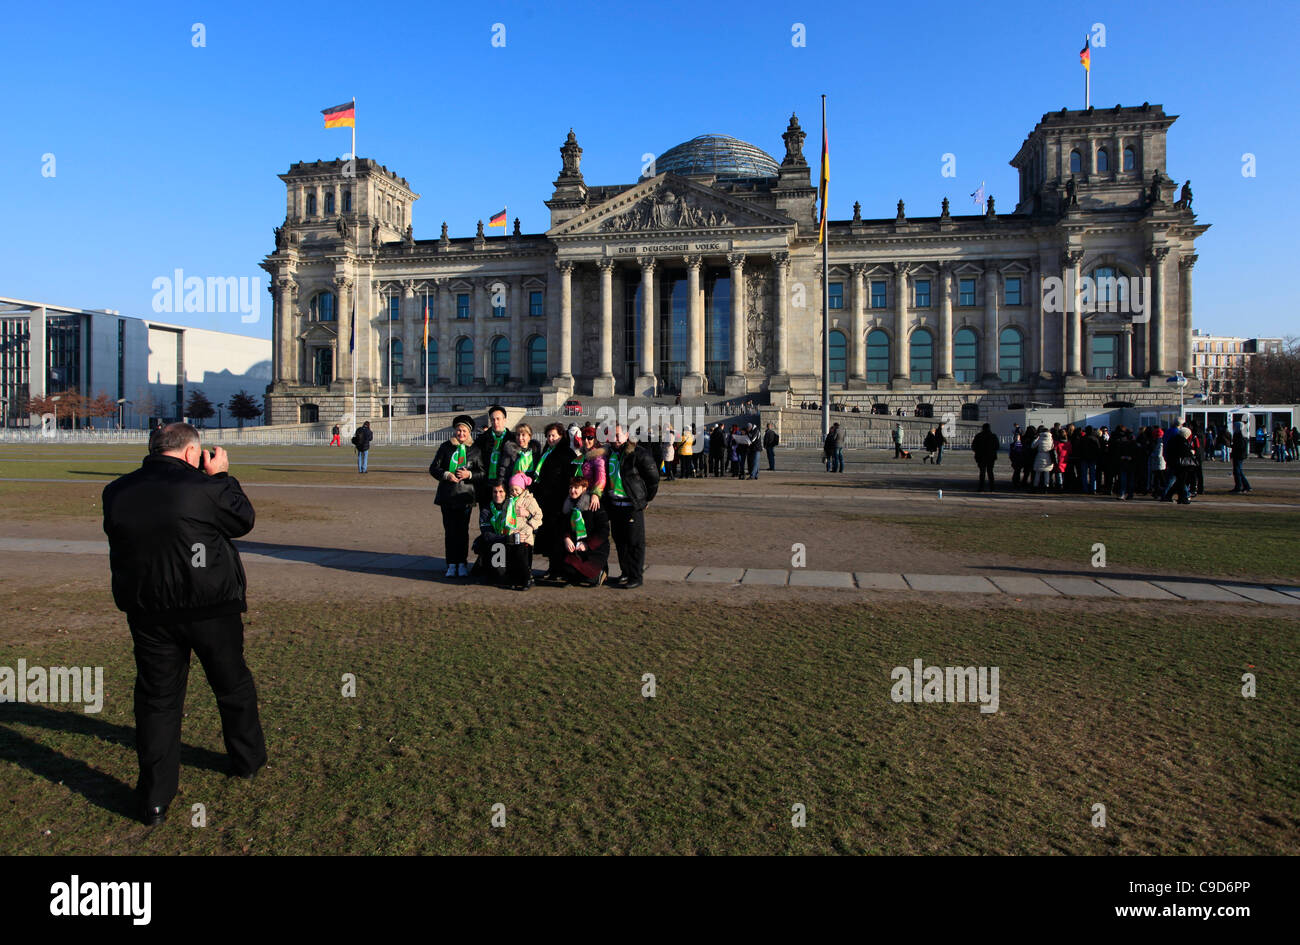 A group of Russian tourists taking a photograph in front of the Reichstag building seat of the Bundestag in Berlin Germany Stock Photo